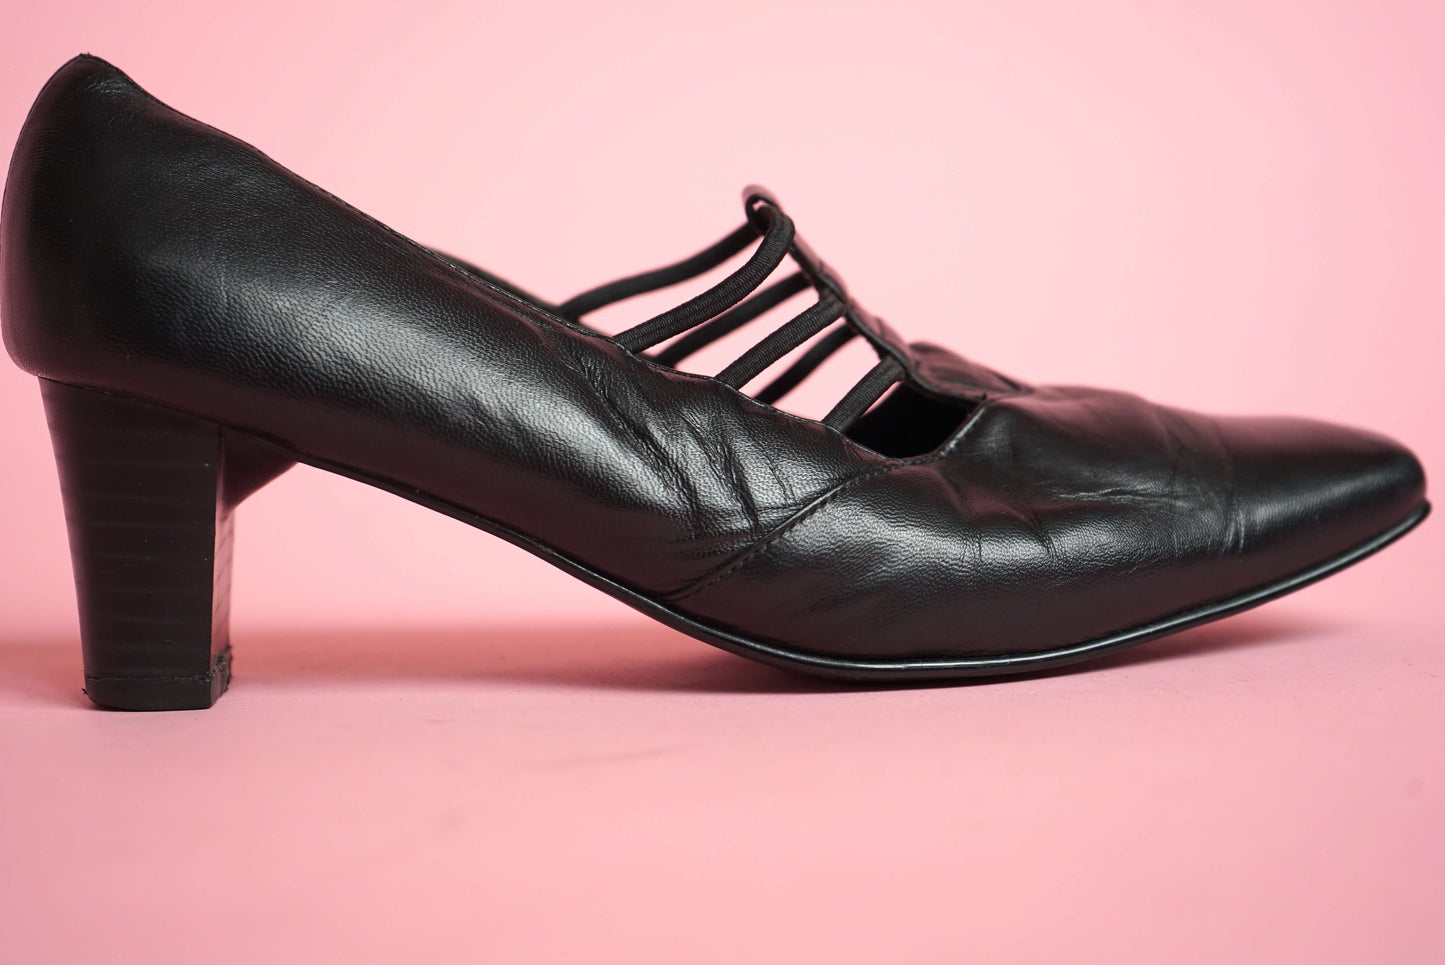 Vintage Black Court Shoes With Elastic Strap Detail On Top Square Toe Size 5-5.5/38-38.5